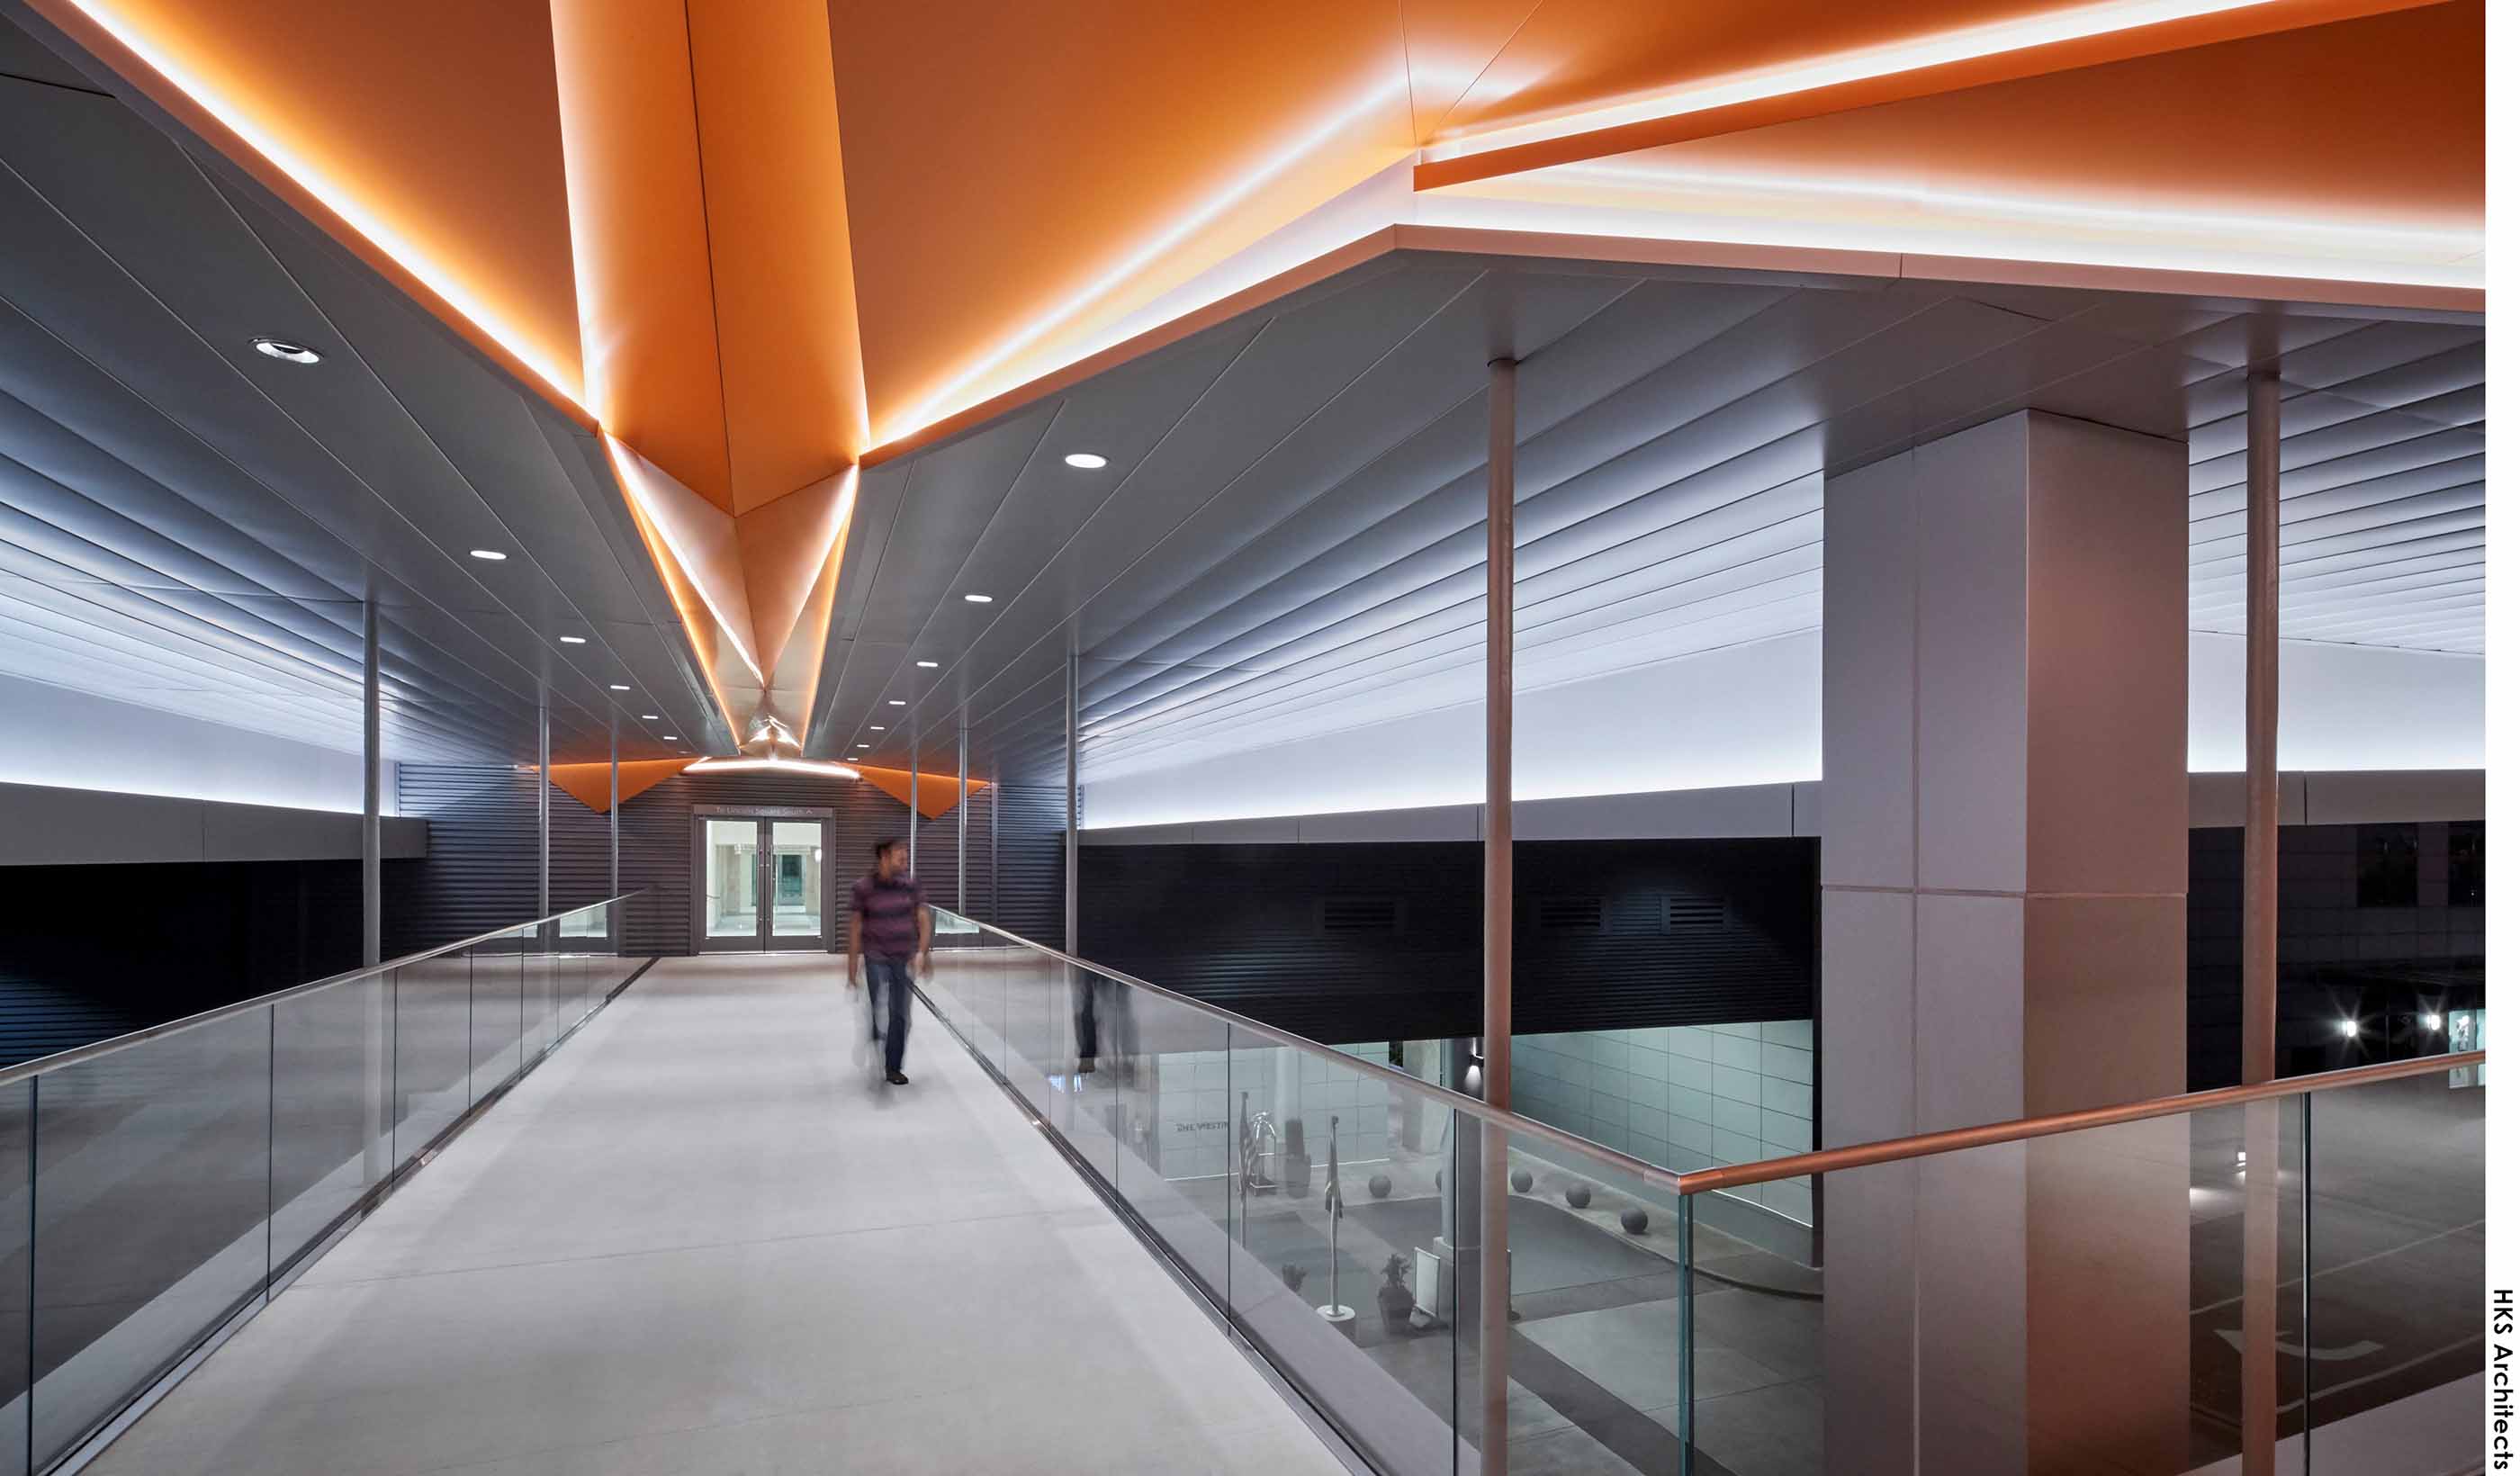 [With Video] From the Design Quarterly: How can lighting design influence wellness?